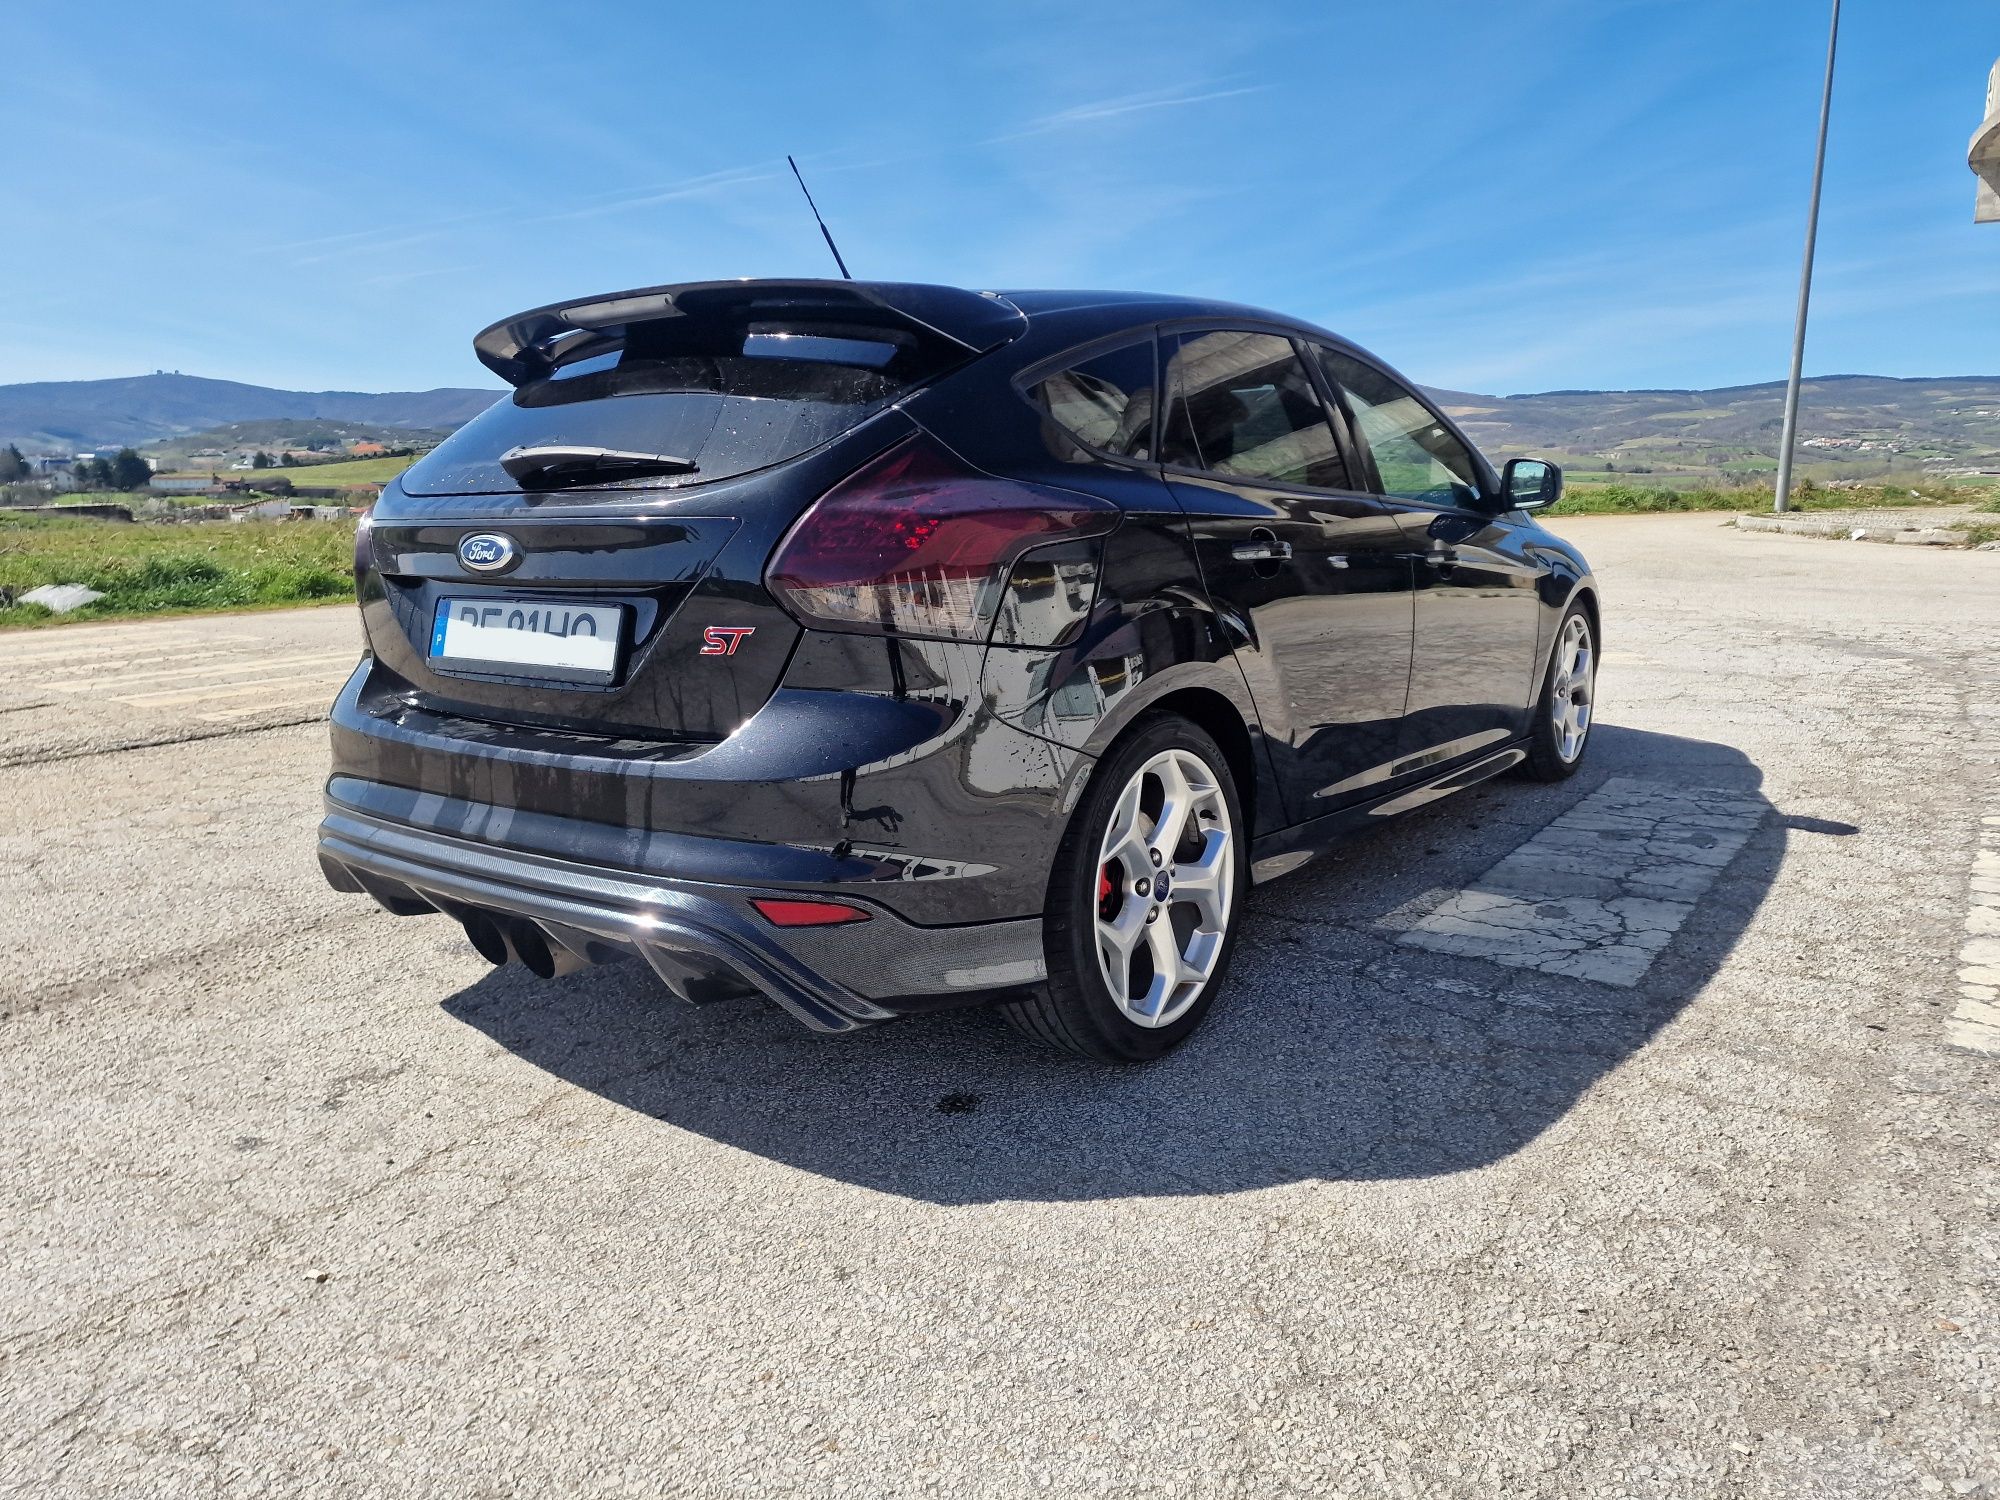 Ford Focus ST 250